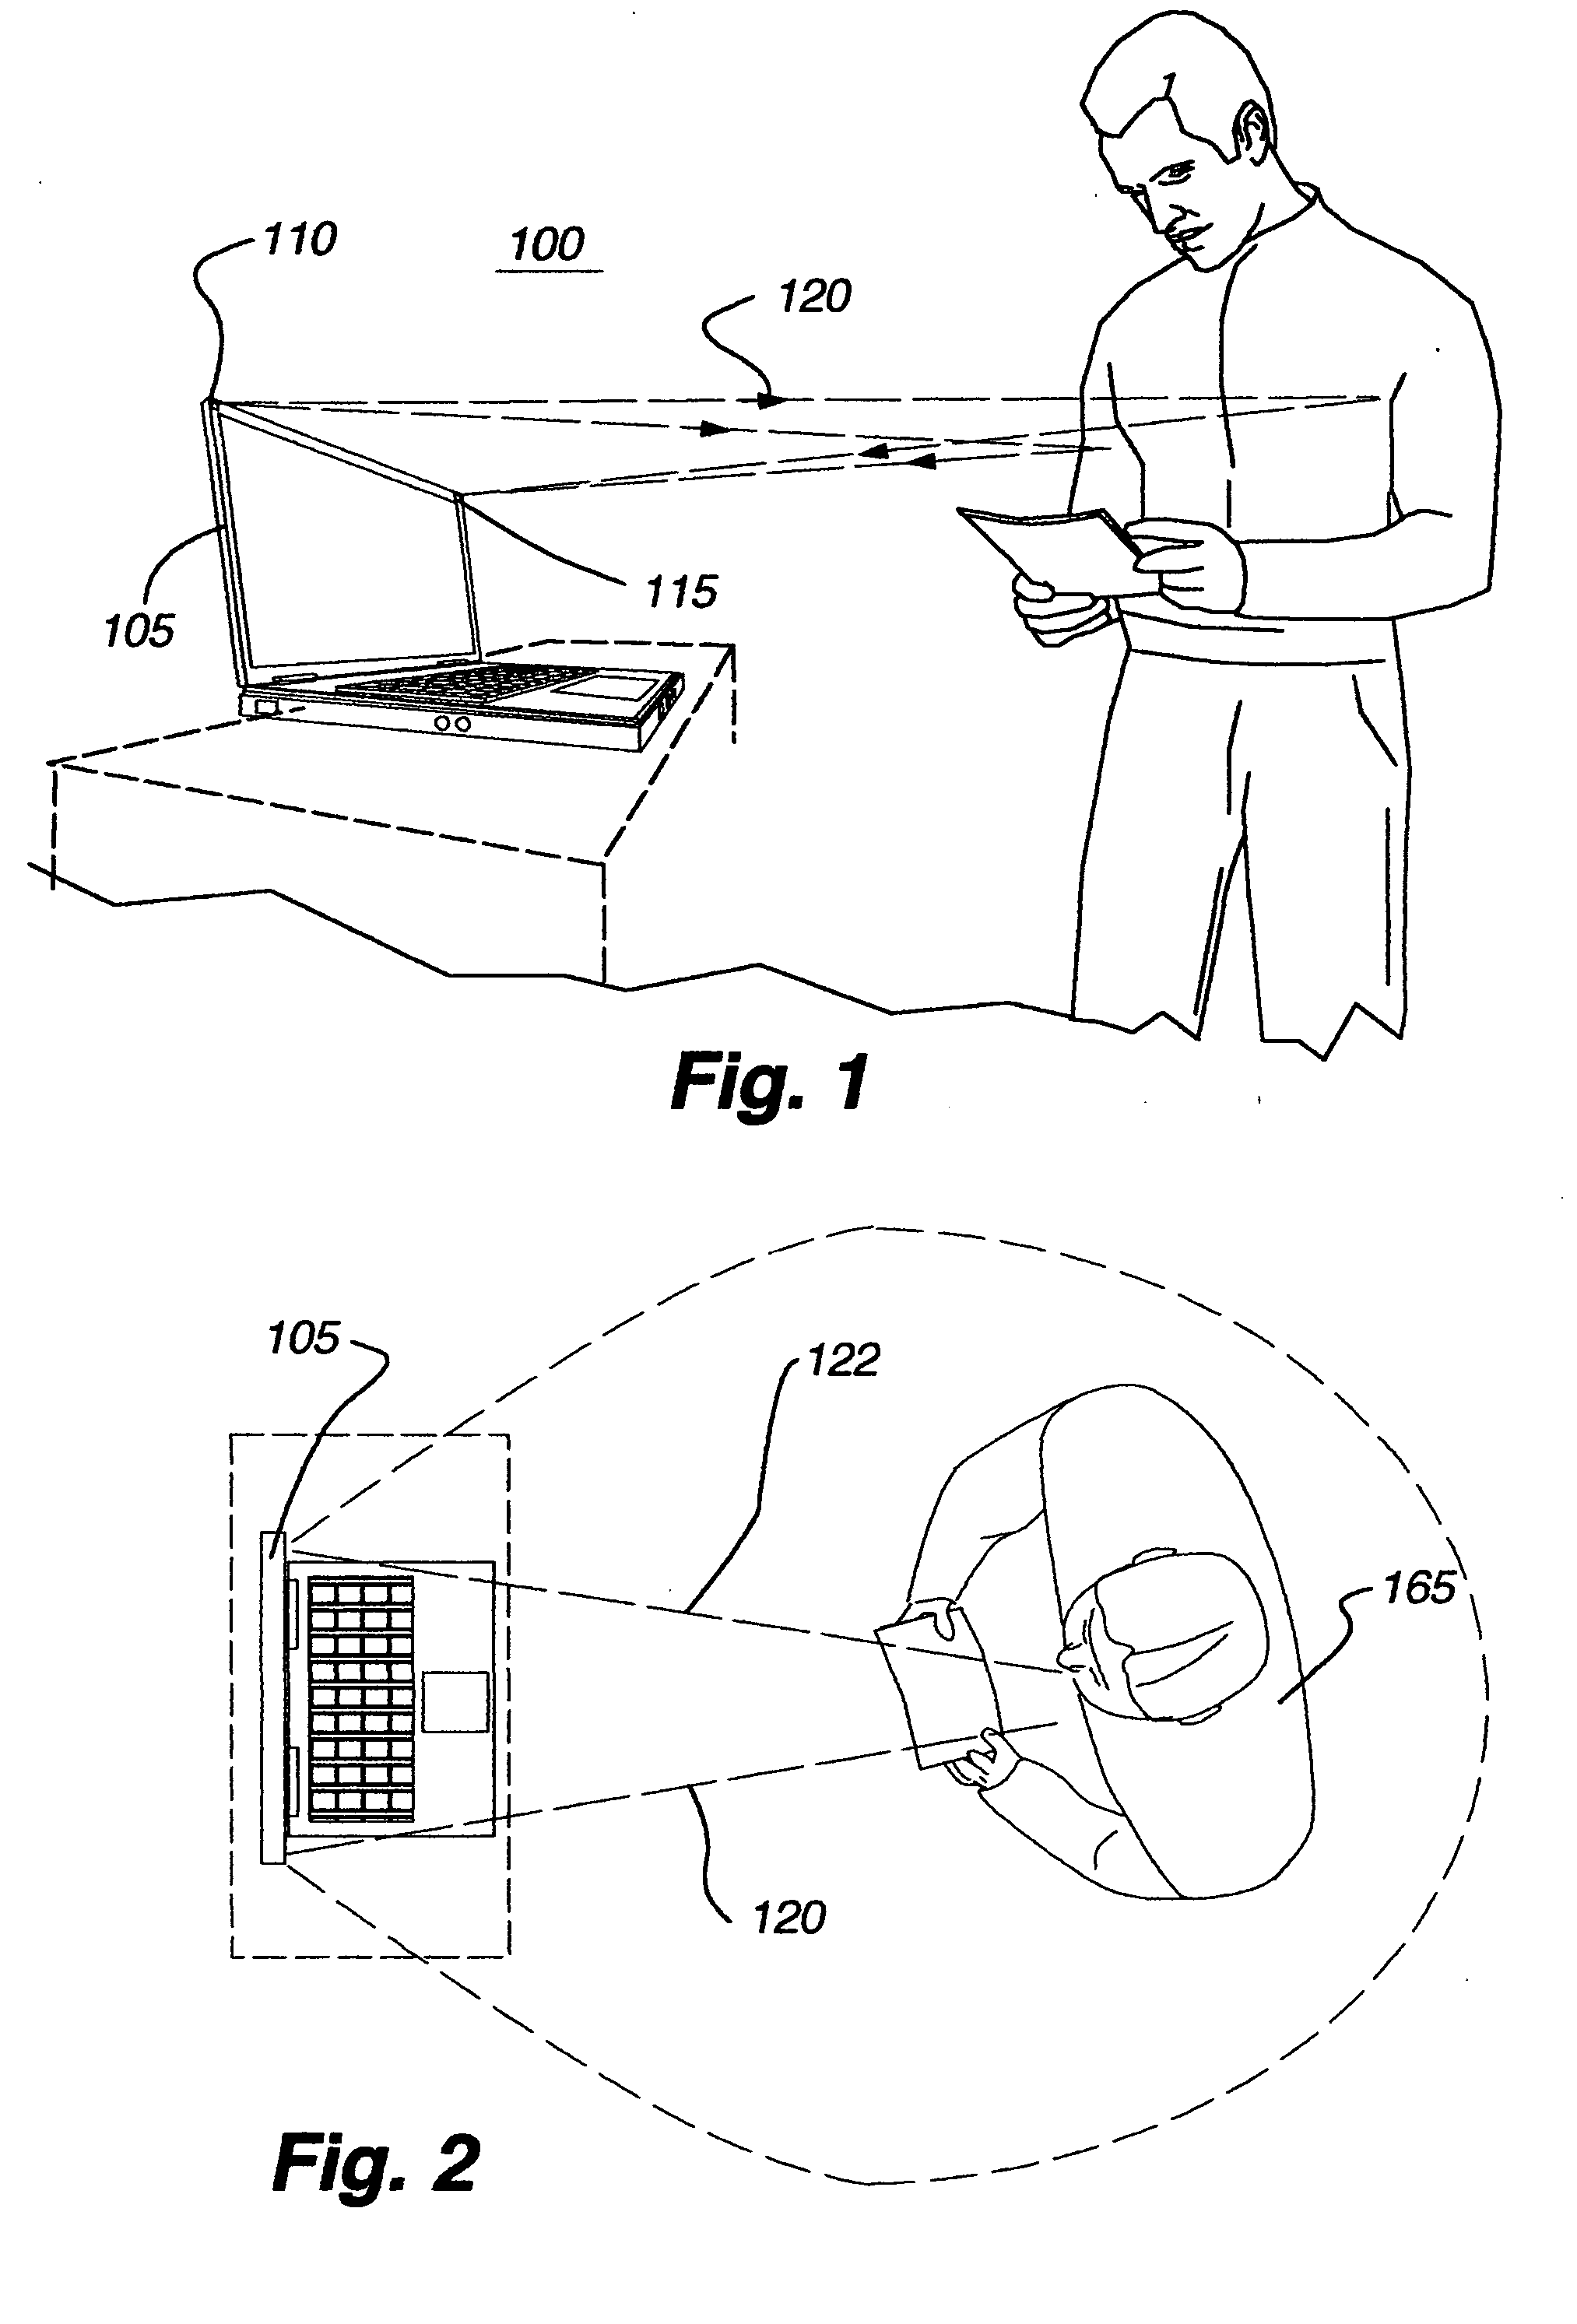 Method and apparatus for remotely detecting presence